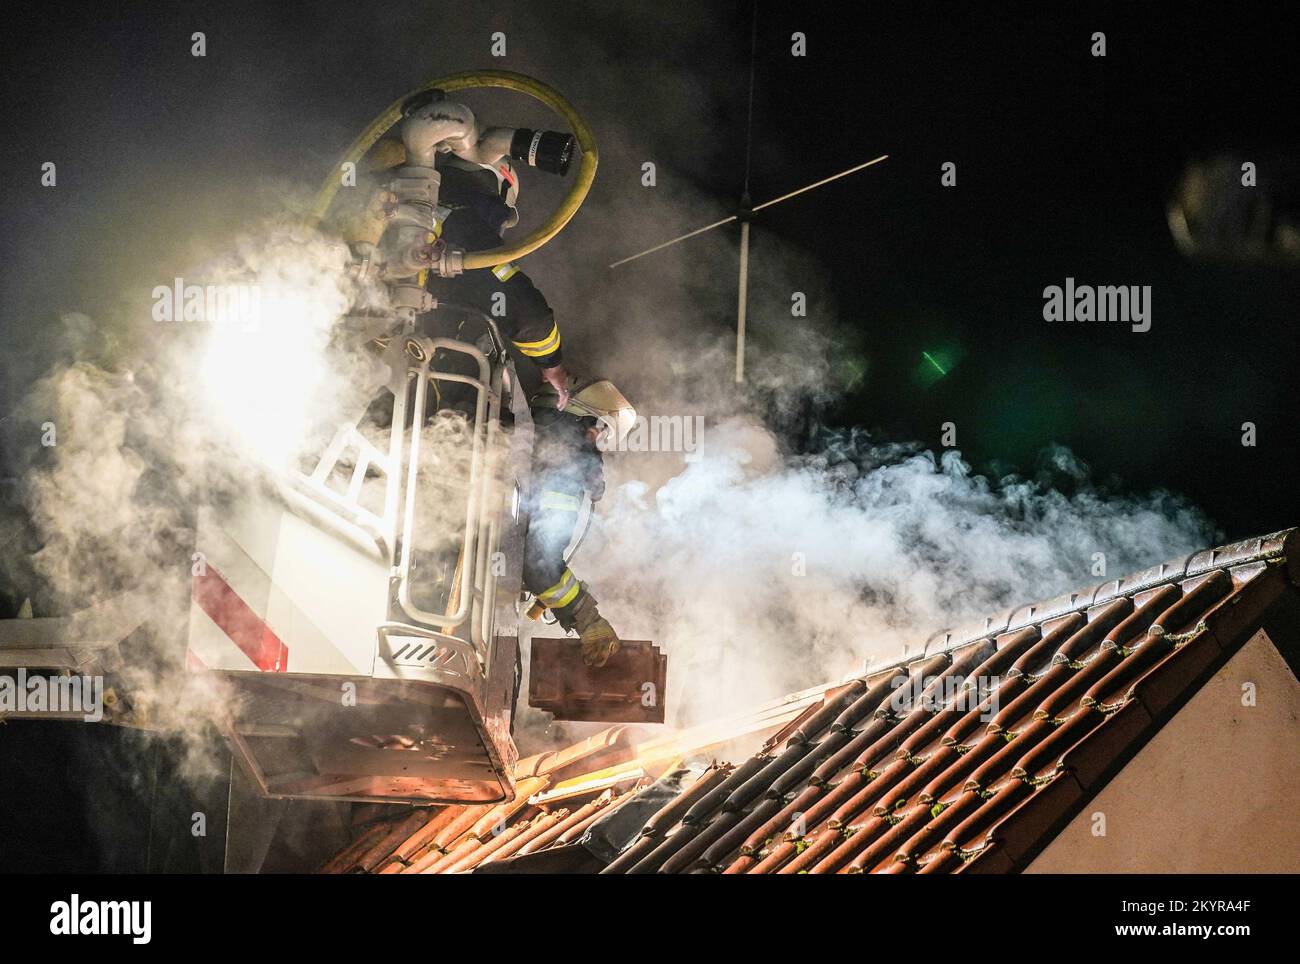 Urbach, Germany. 01st Dec, 2022. Firefighters extinguish a fire from a turntable ladder. A fire in the family house caused damage of about 400 000 euros. The 56-year-old homeowner had placed a pot with hot ashes on the terrace on Thursday evening. According to the report, the pot had ignited and started a fire that spread to the facade, the house entrance and finally the attic. (to dpa: 'Pot with hot ash on balcony: residential building burns down') Credit: Kohls/SDMG/dpa/Alamy Live News Stock Photo